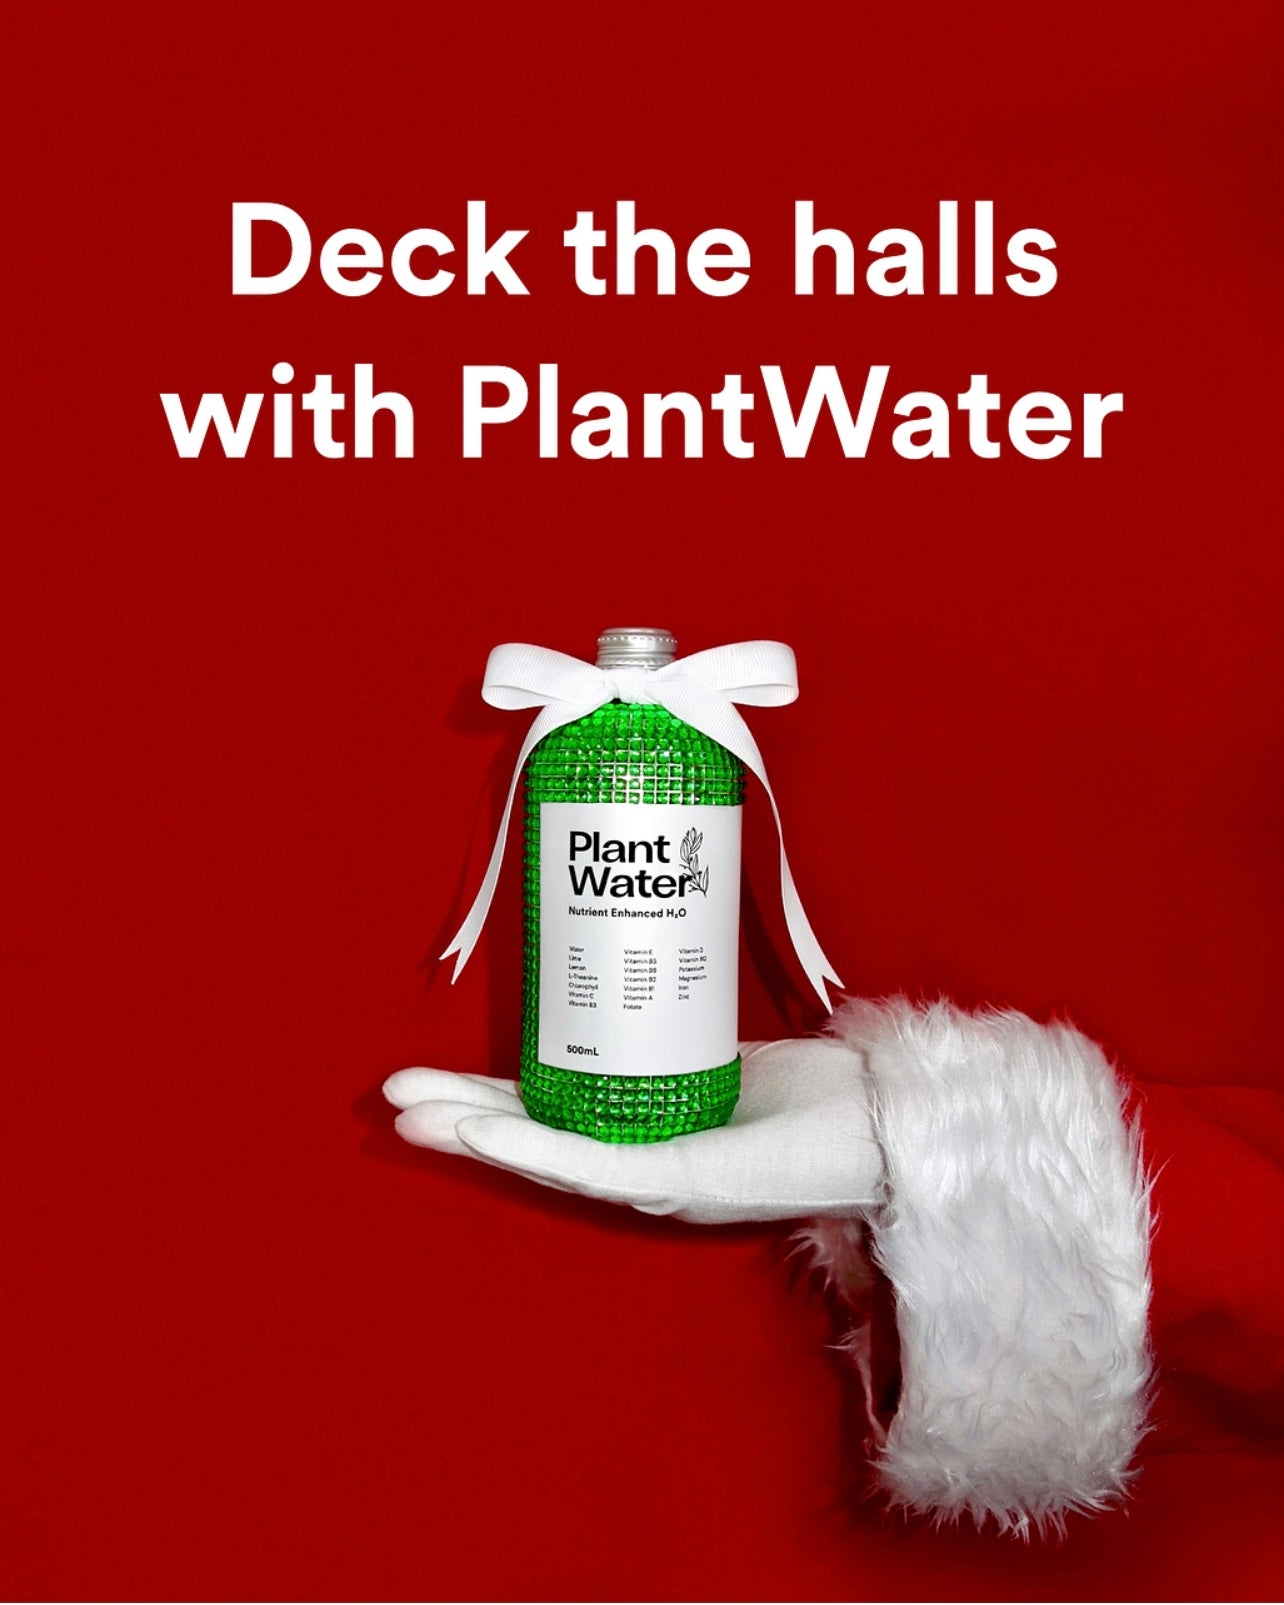 Deck the halls with PlantWater